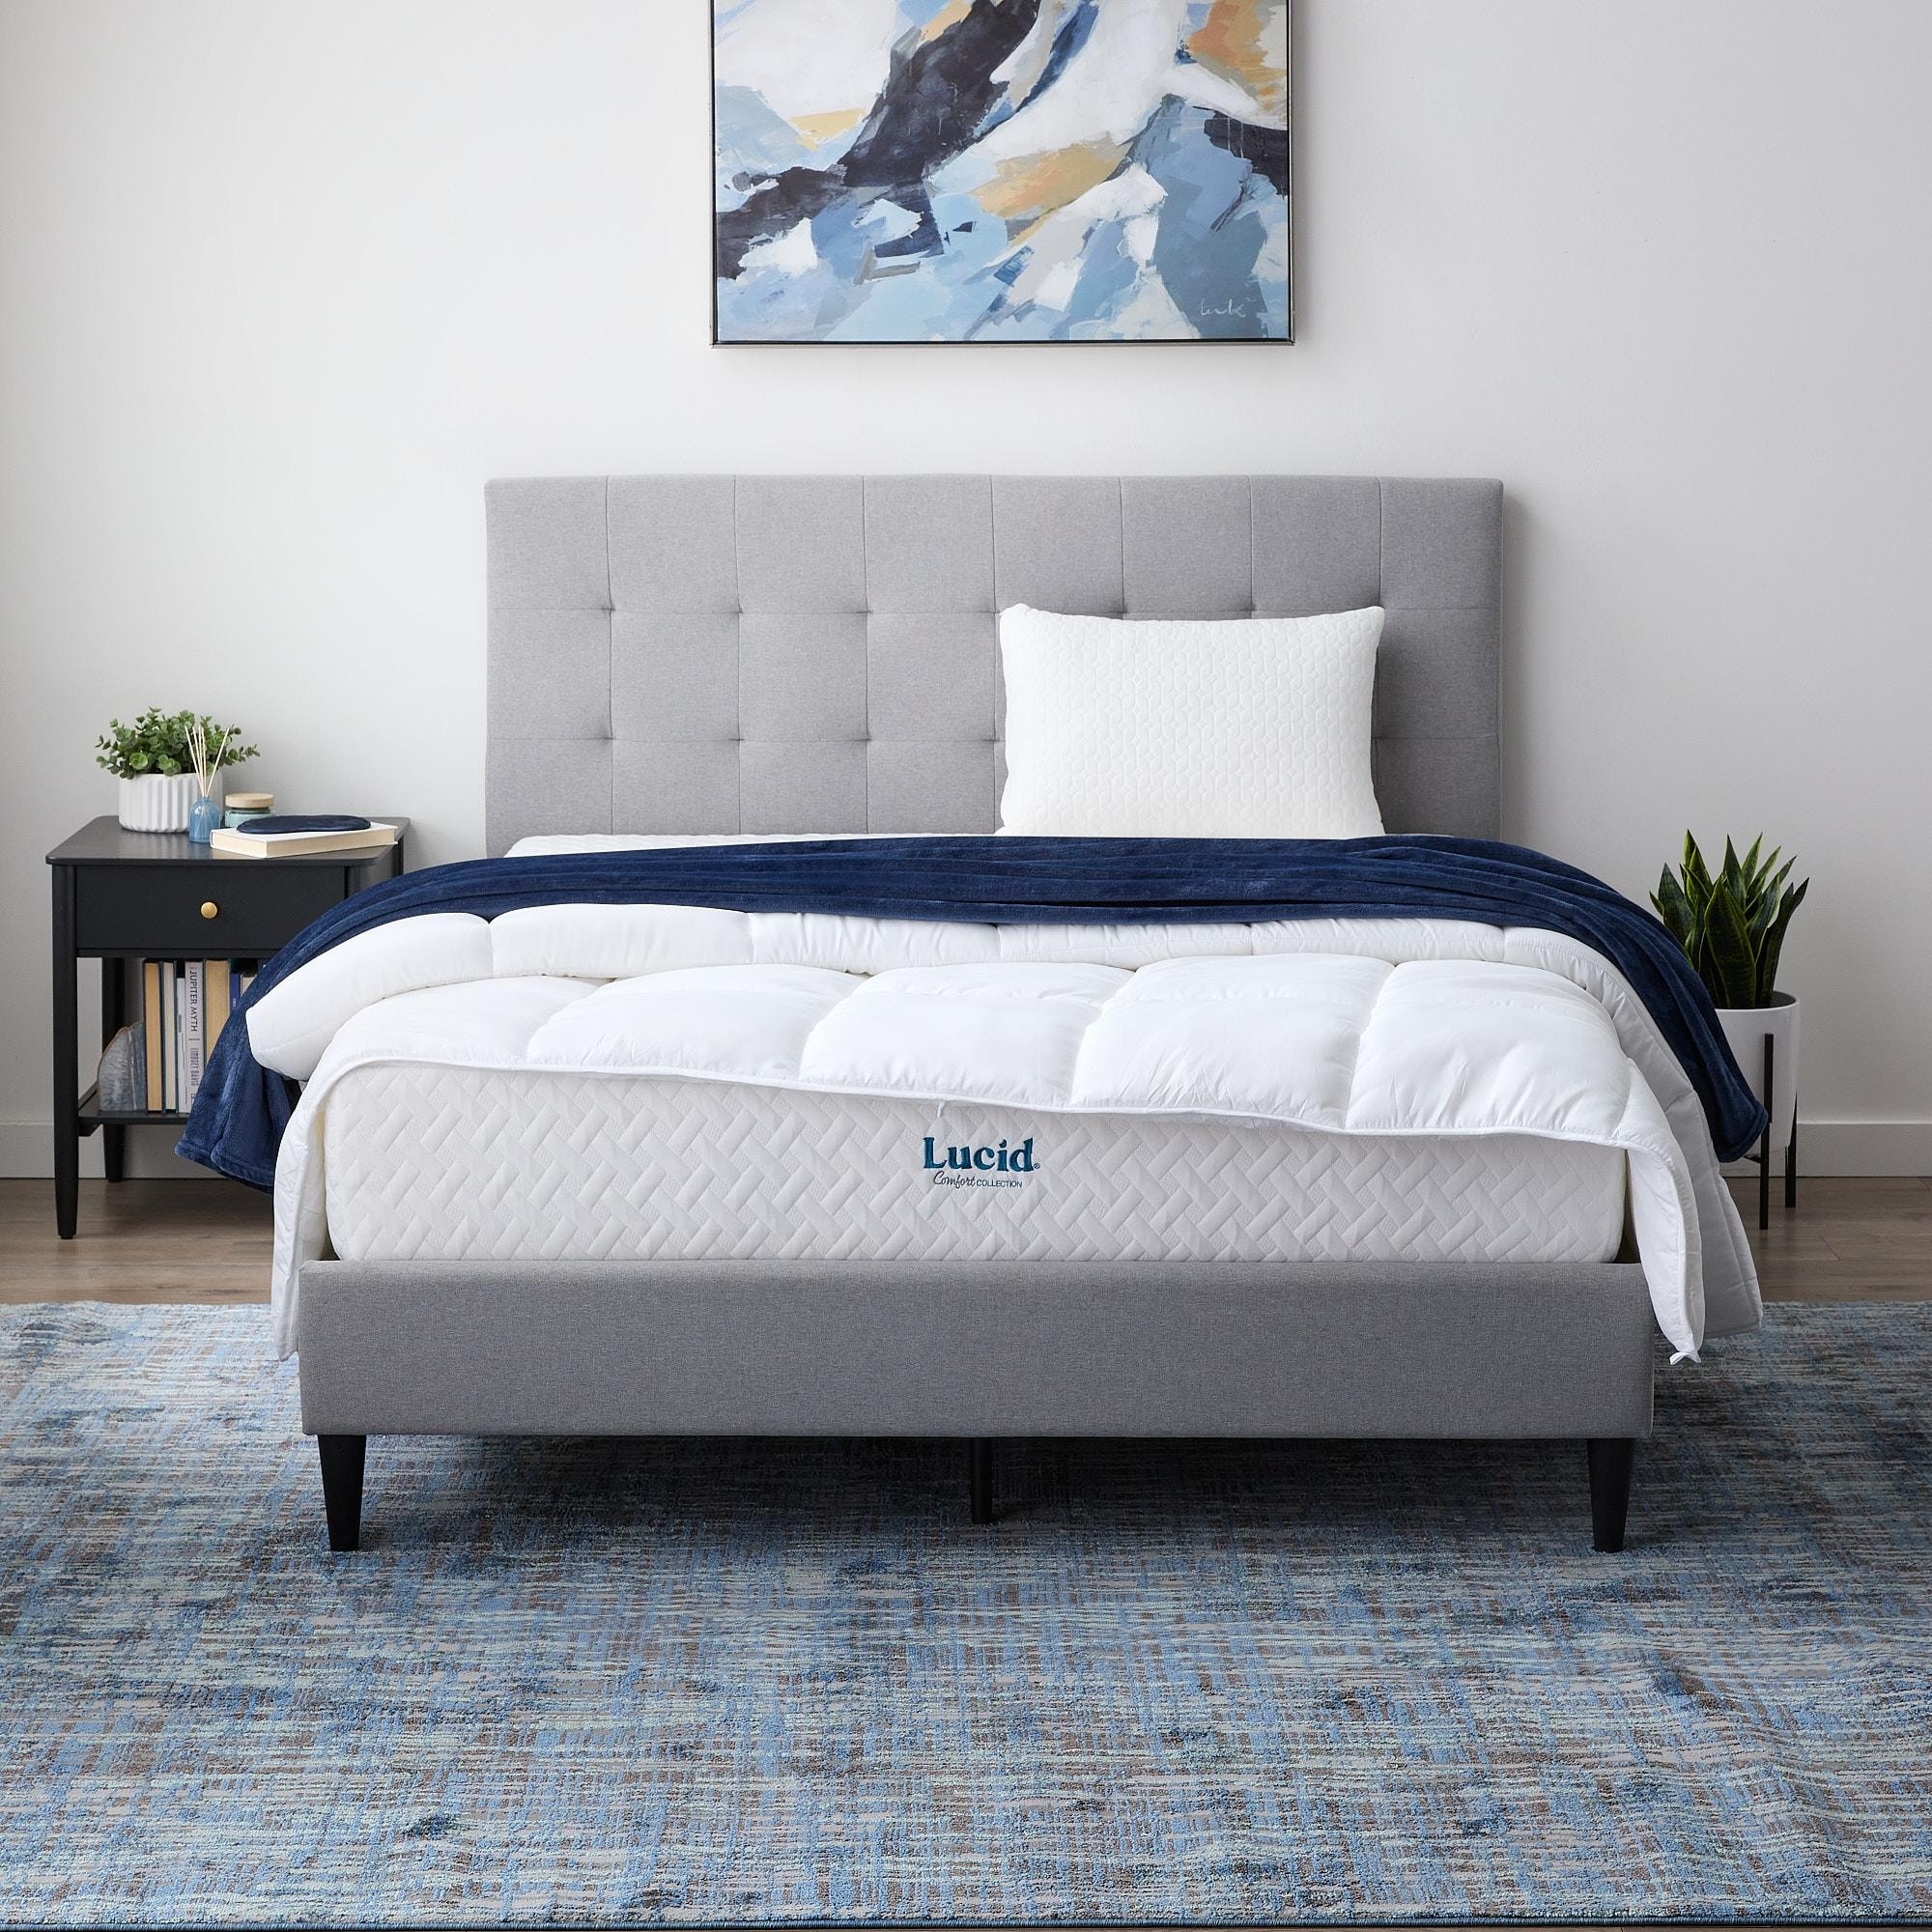 https://ak1.ostkcdn.com/images/products/is/images/direct/1924dbbf2f2bc40e9a0c0866fe5922ffc4300786/LUCID-Comfort-Collection-10-inch-Luxury-Gel-Memory-Foam-Mattress.jpg